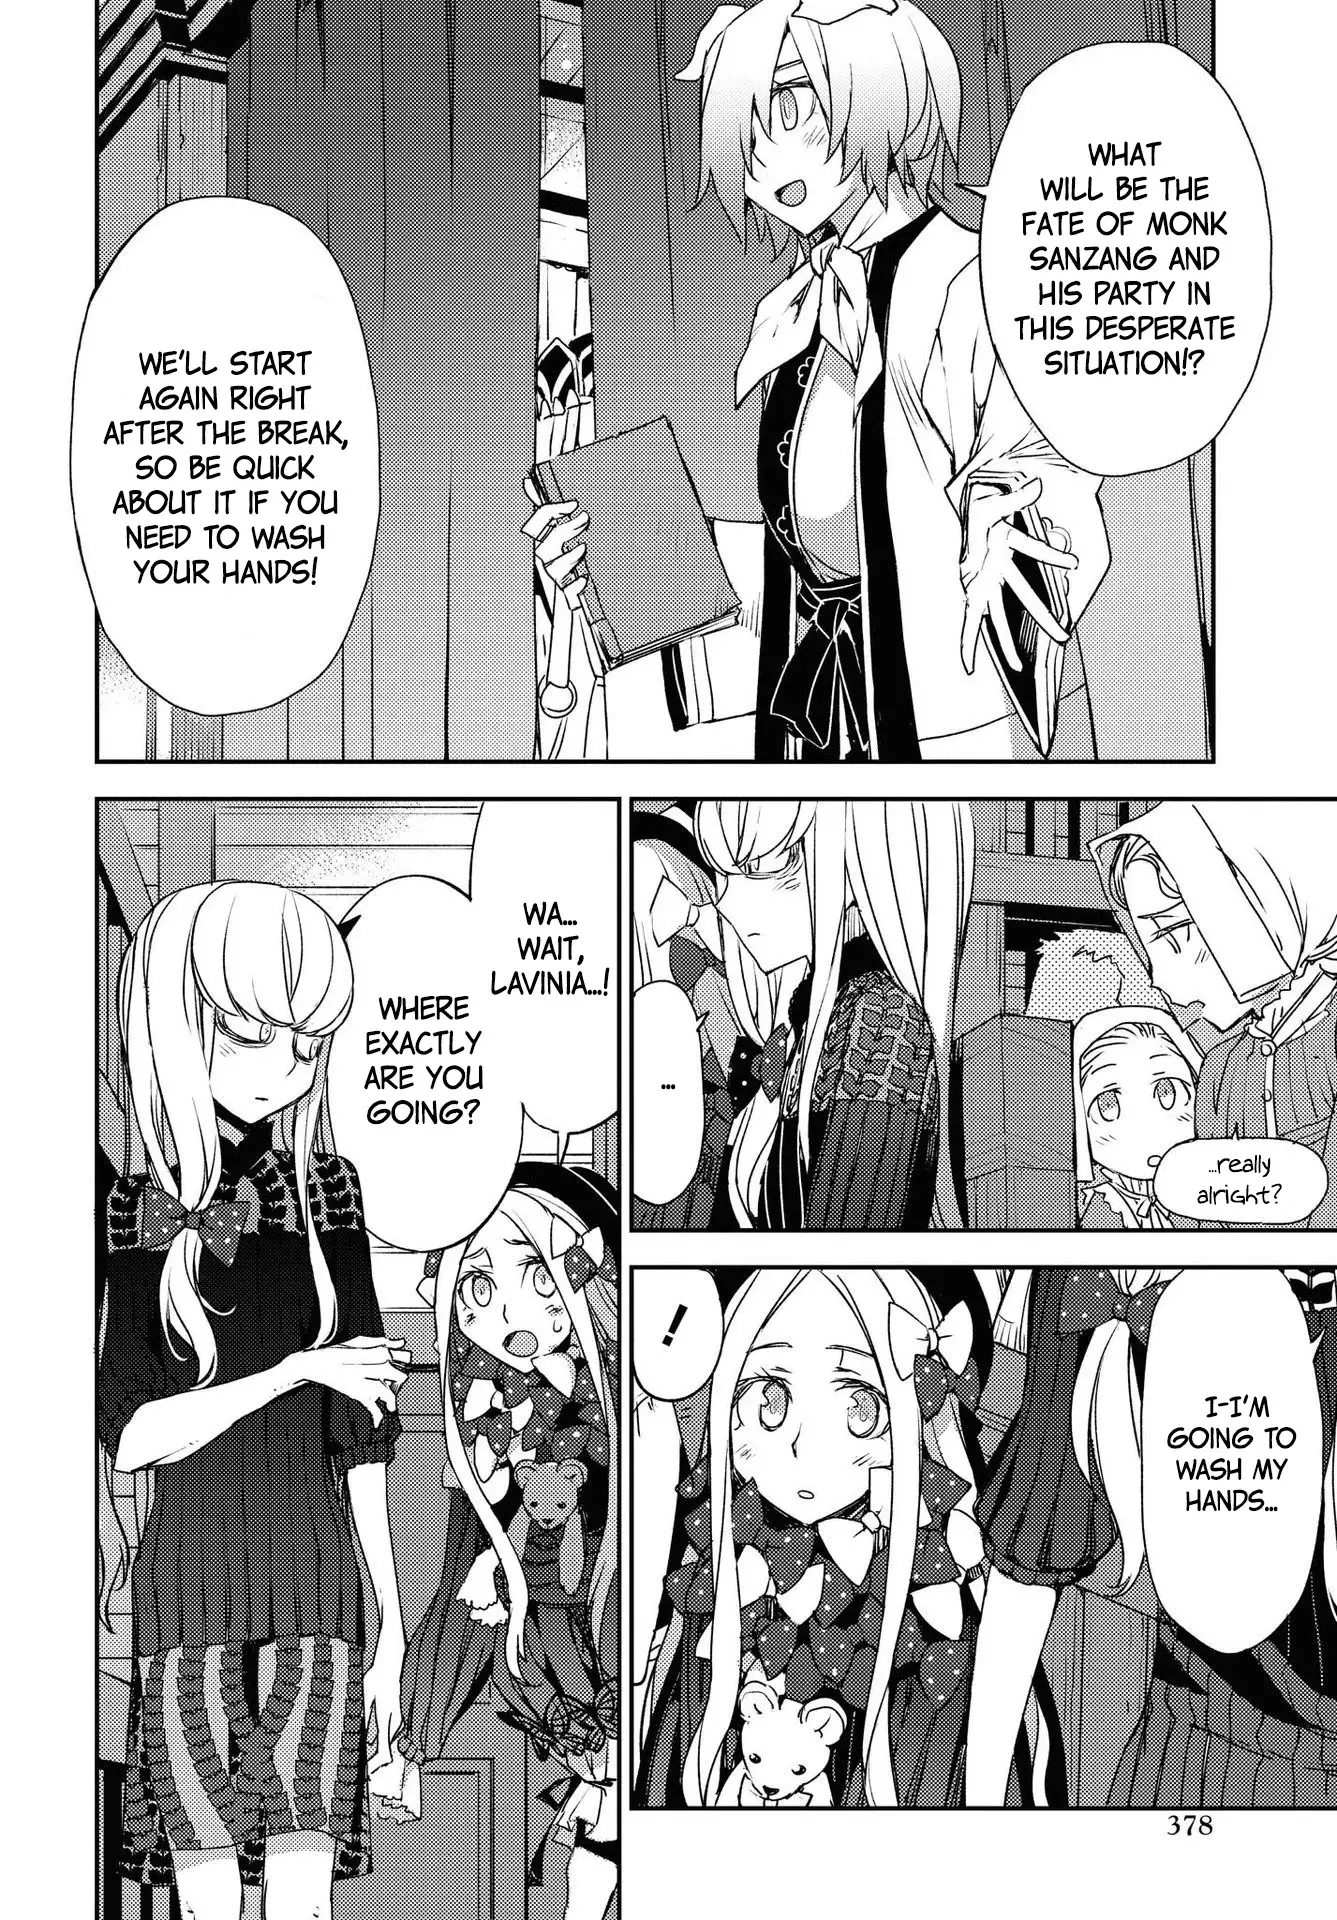 Fate/grand Order: Epic Of Remnant - Subspecies Singularity Iv: Taboo Advent Salem: Salem Of Heresy - 22 page 13-b49a6efb